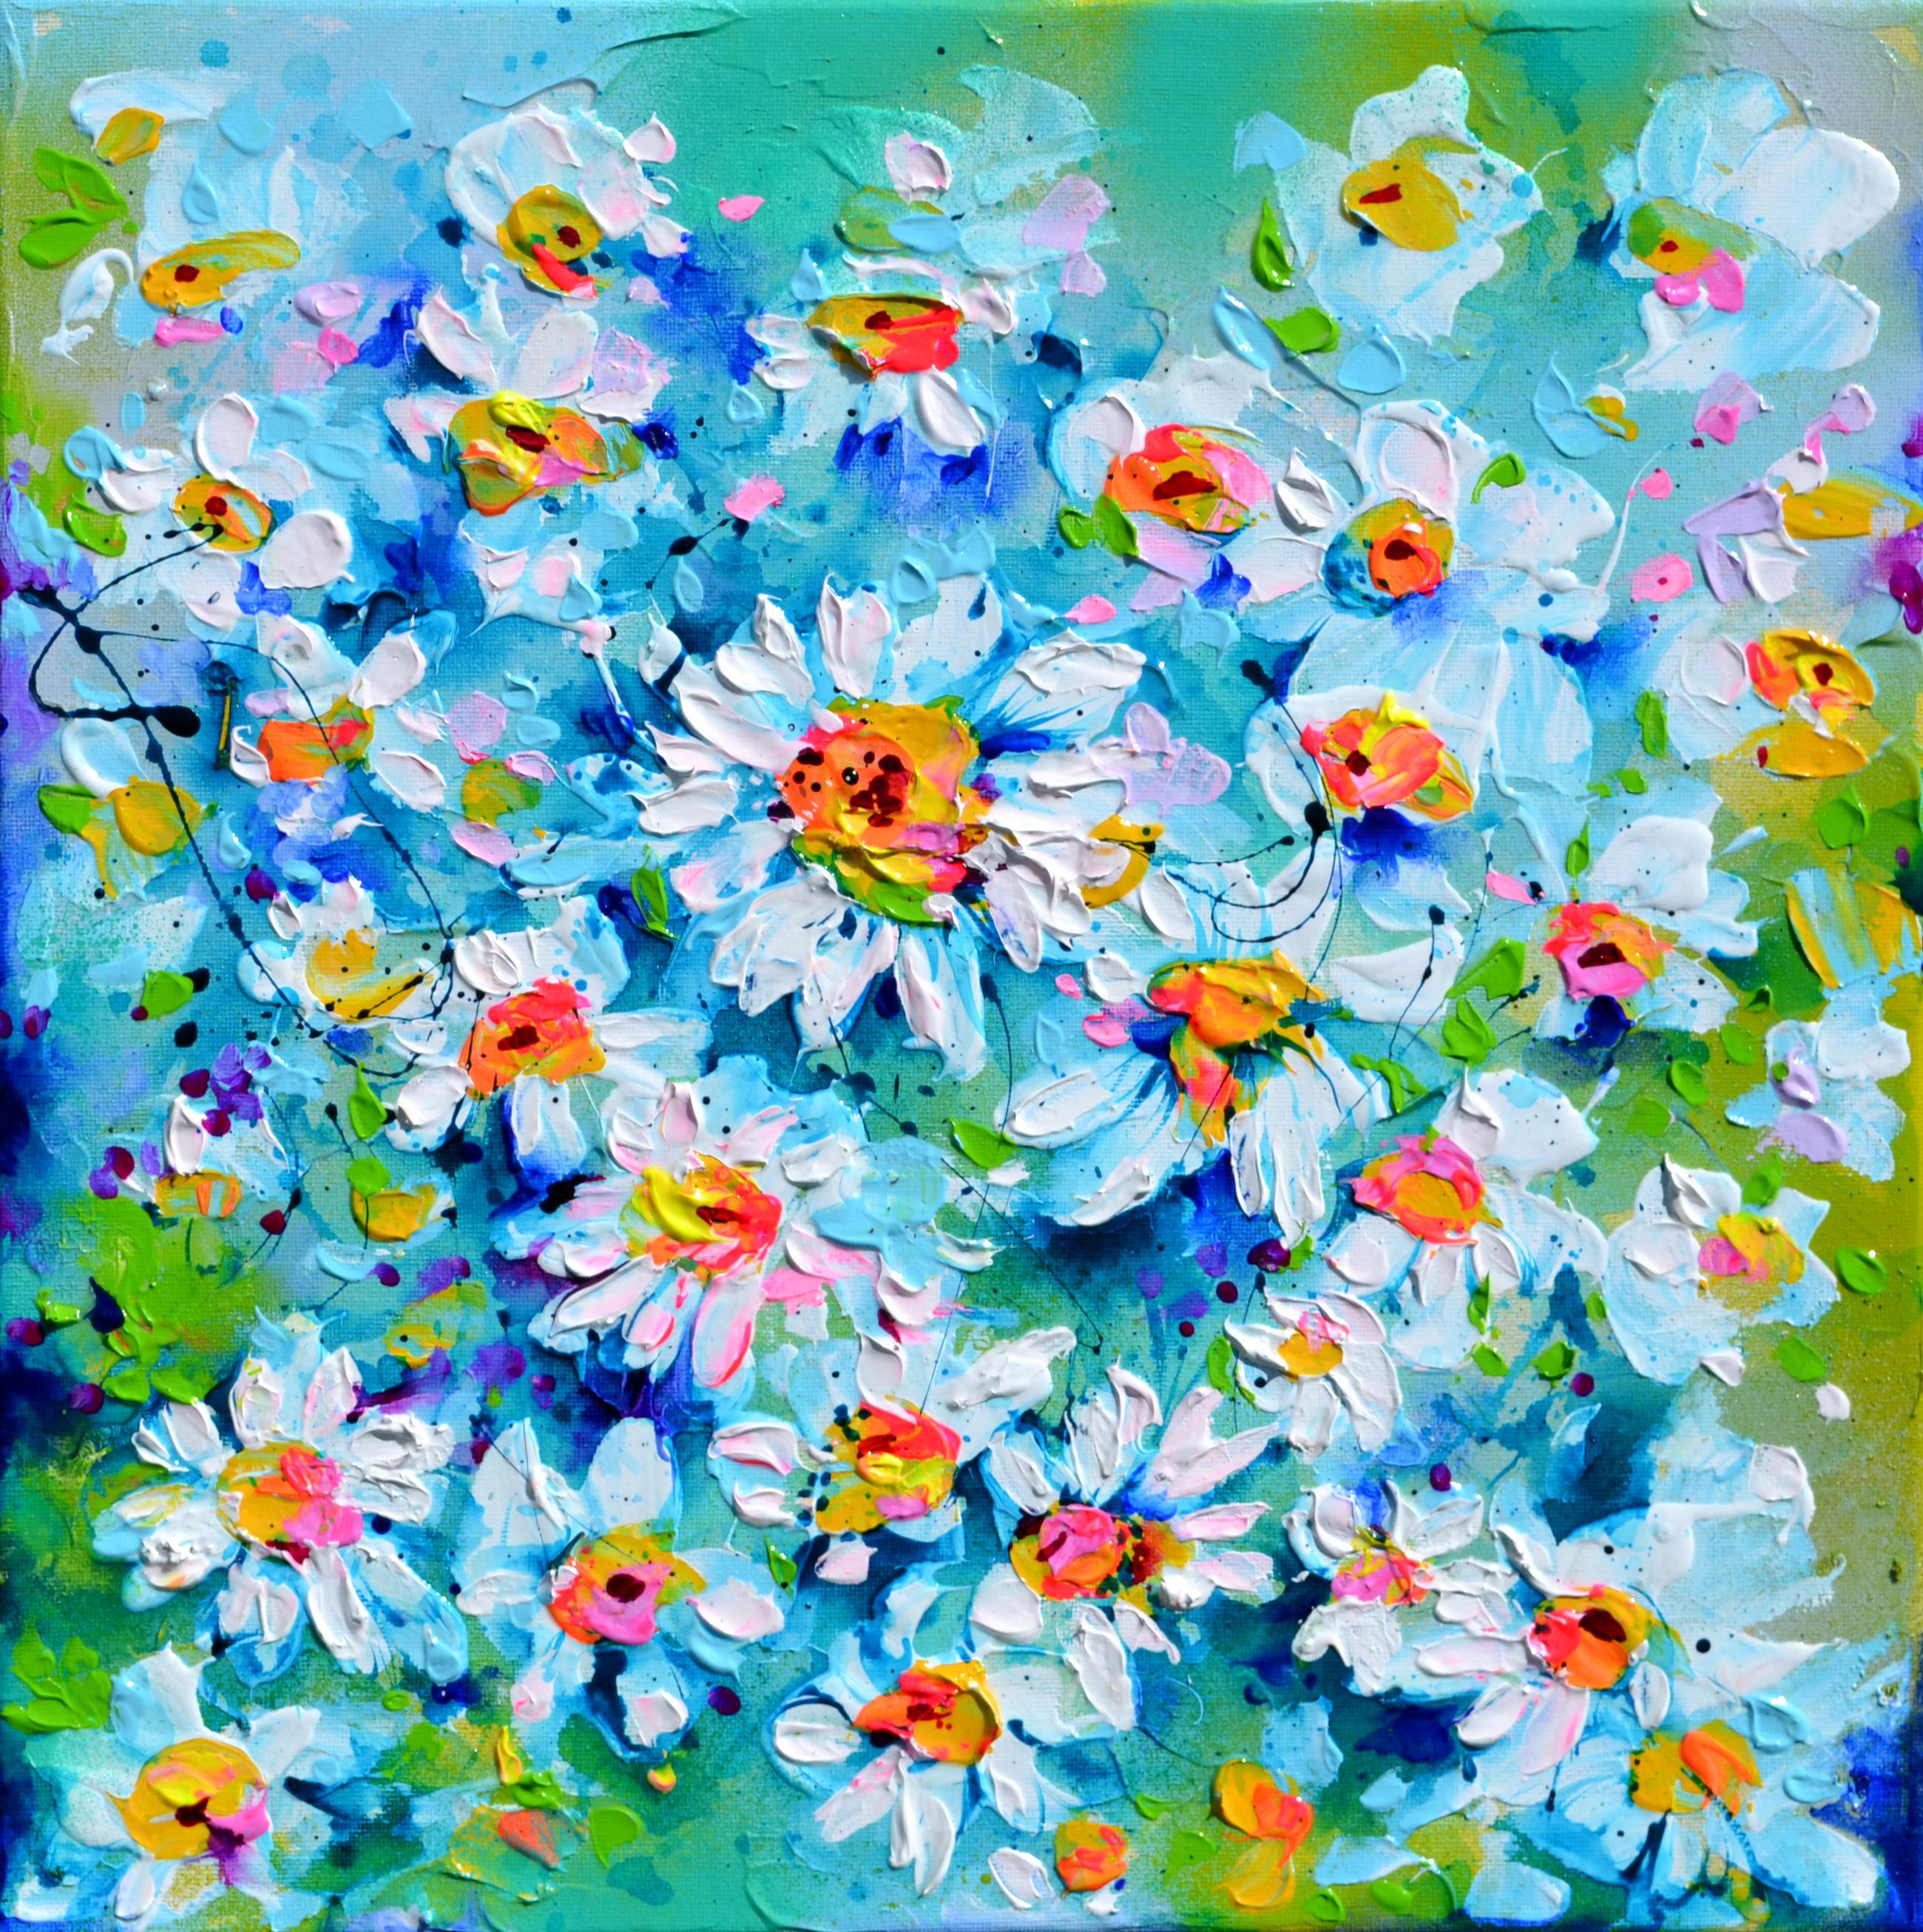 Soos Roxana Gabriela Landscape Painting - White Daisies Field - Daisy Flowers - Tiny Small Painting